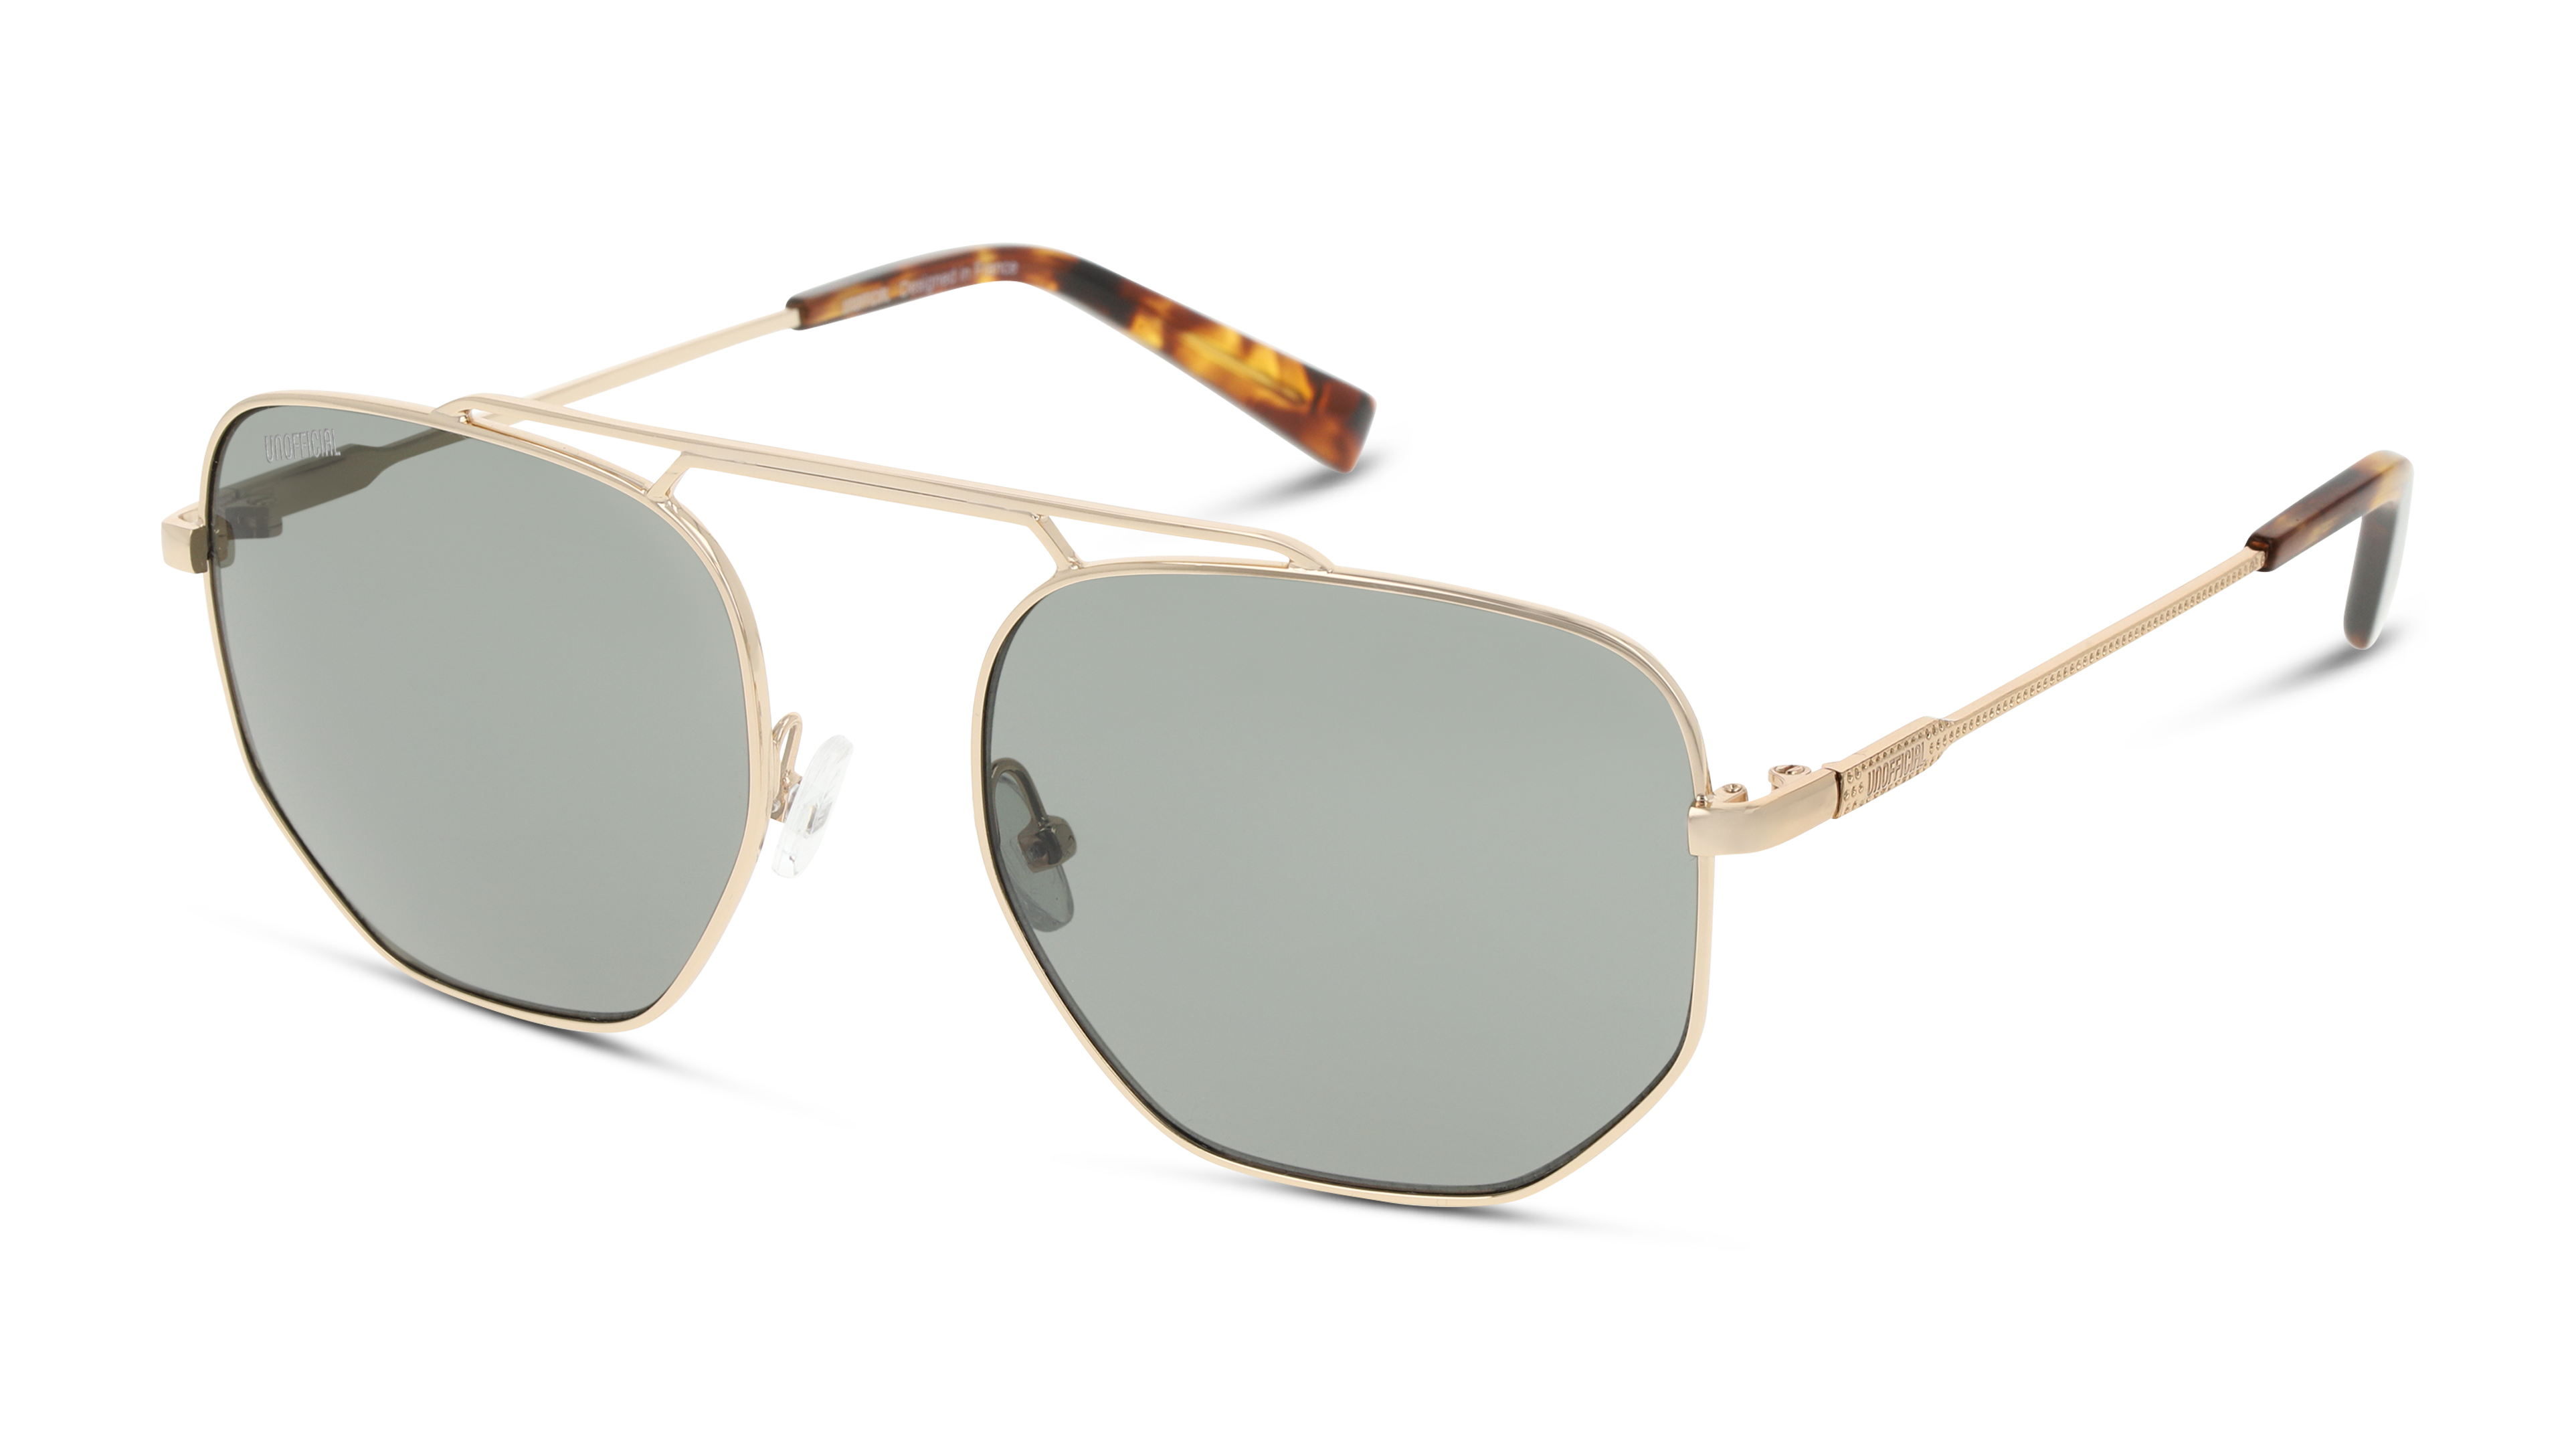 Angle_Left01 Unofficial UNSM0118 Sunglasses Green / Gold